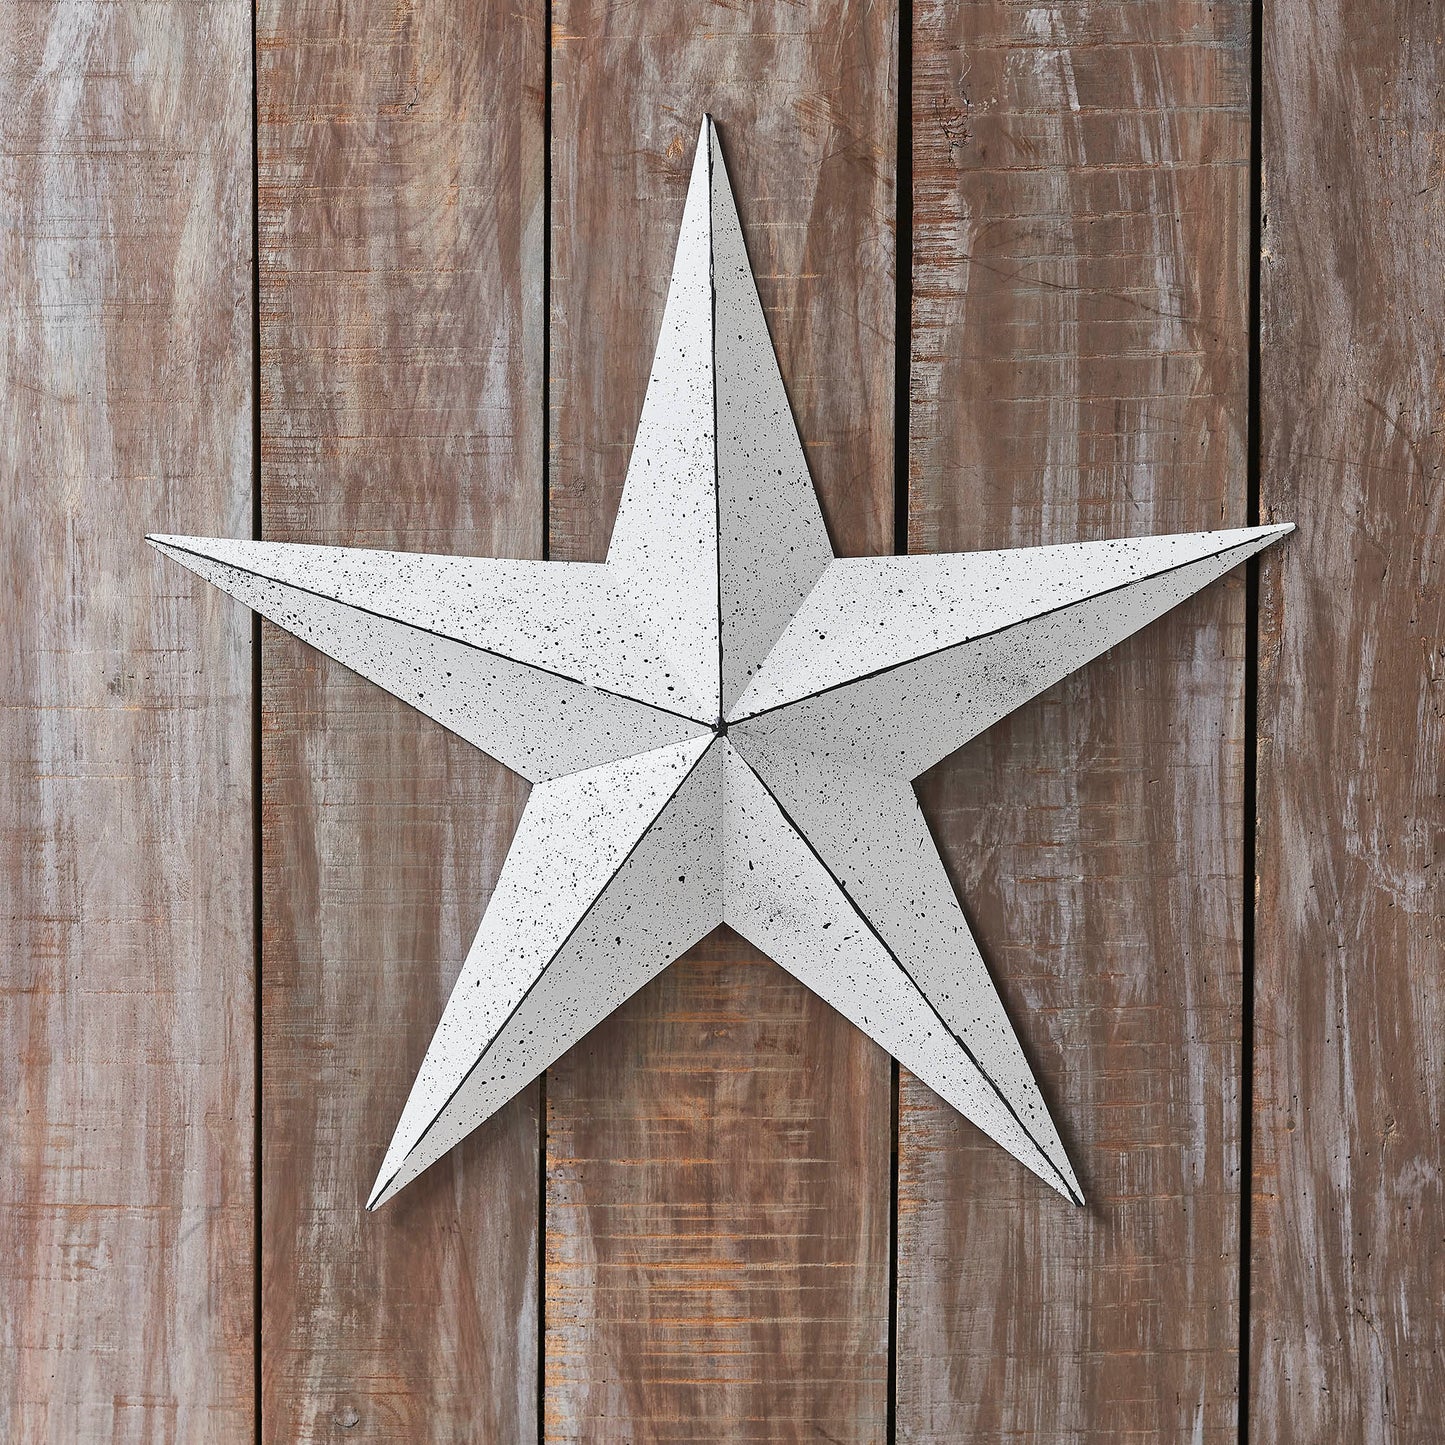 VHC Brands Patriotic Faceted Metal Star White Wall Hanging 24x24, Independence Day Decor, American Star Design, Distressed Appearance Metal Wall Hanging,  Star Shape, Country, Matte White